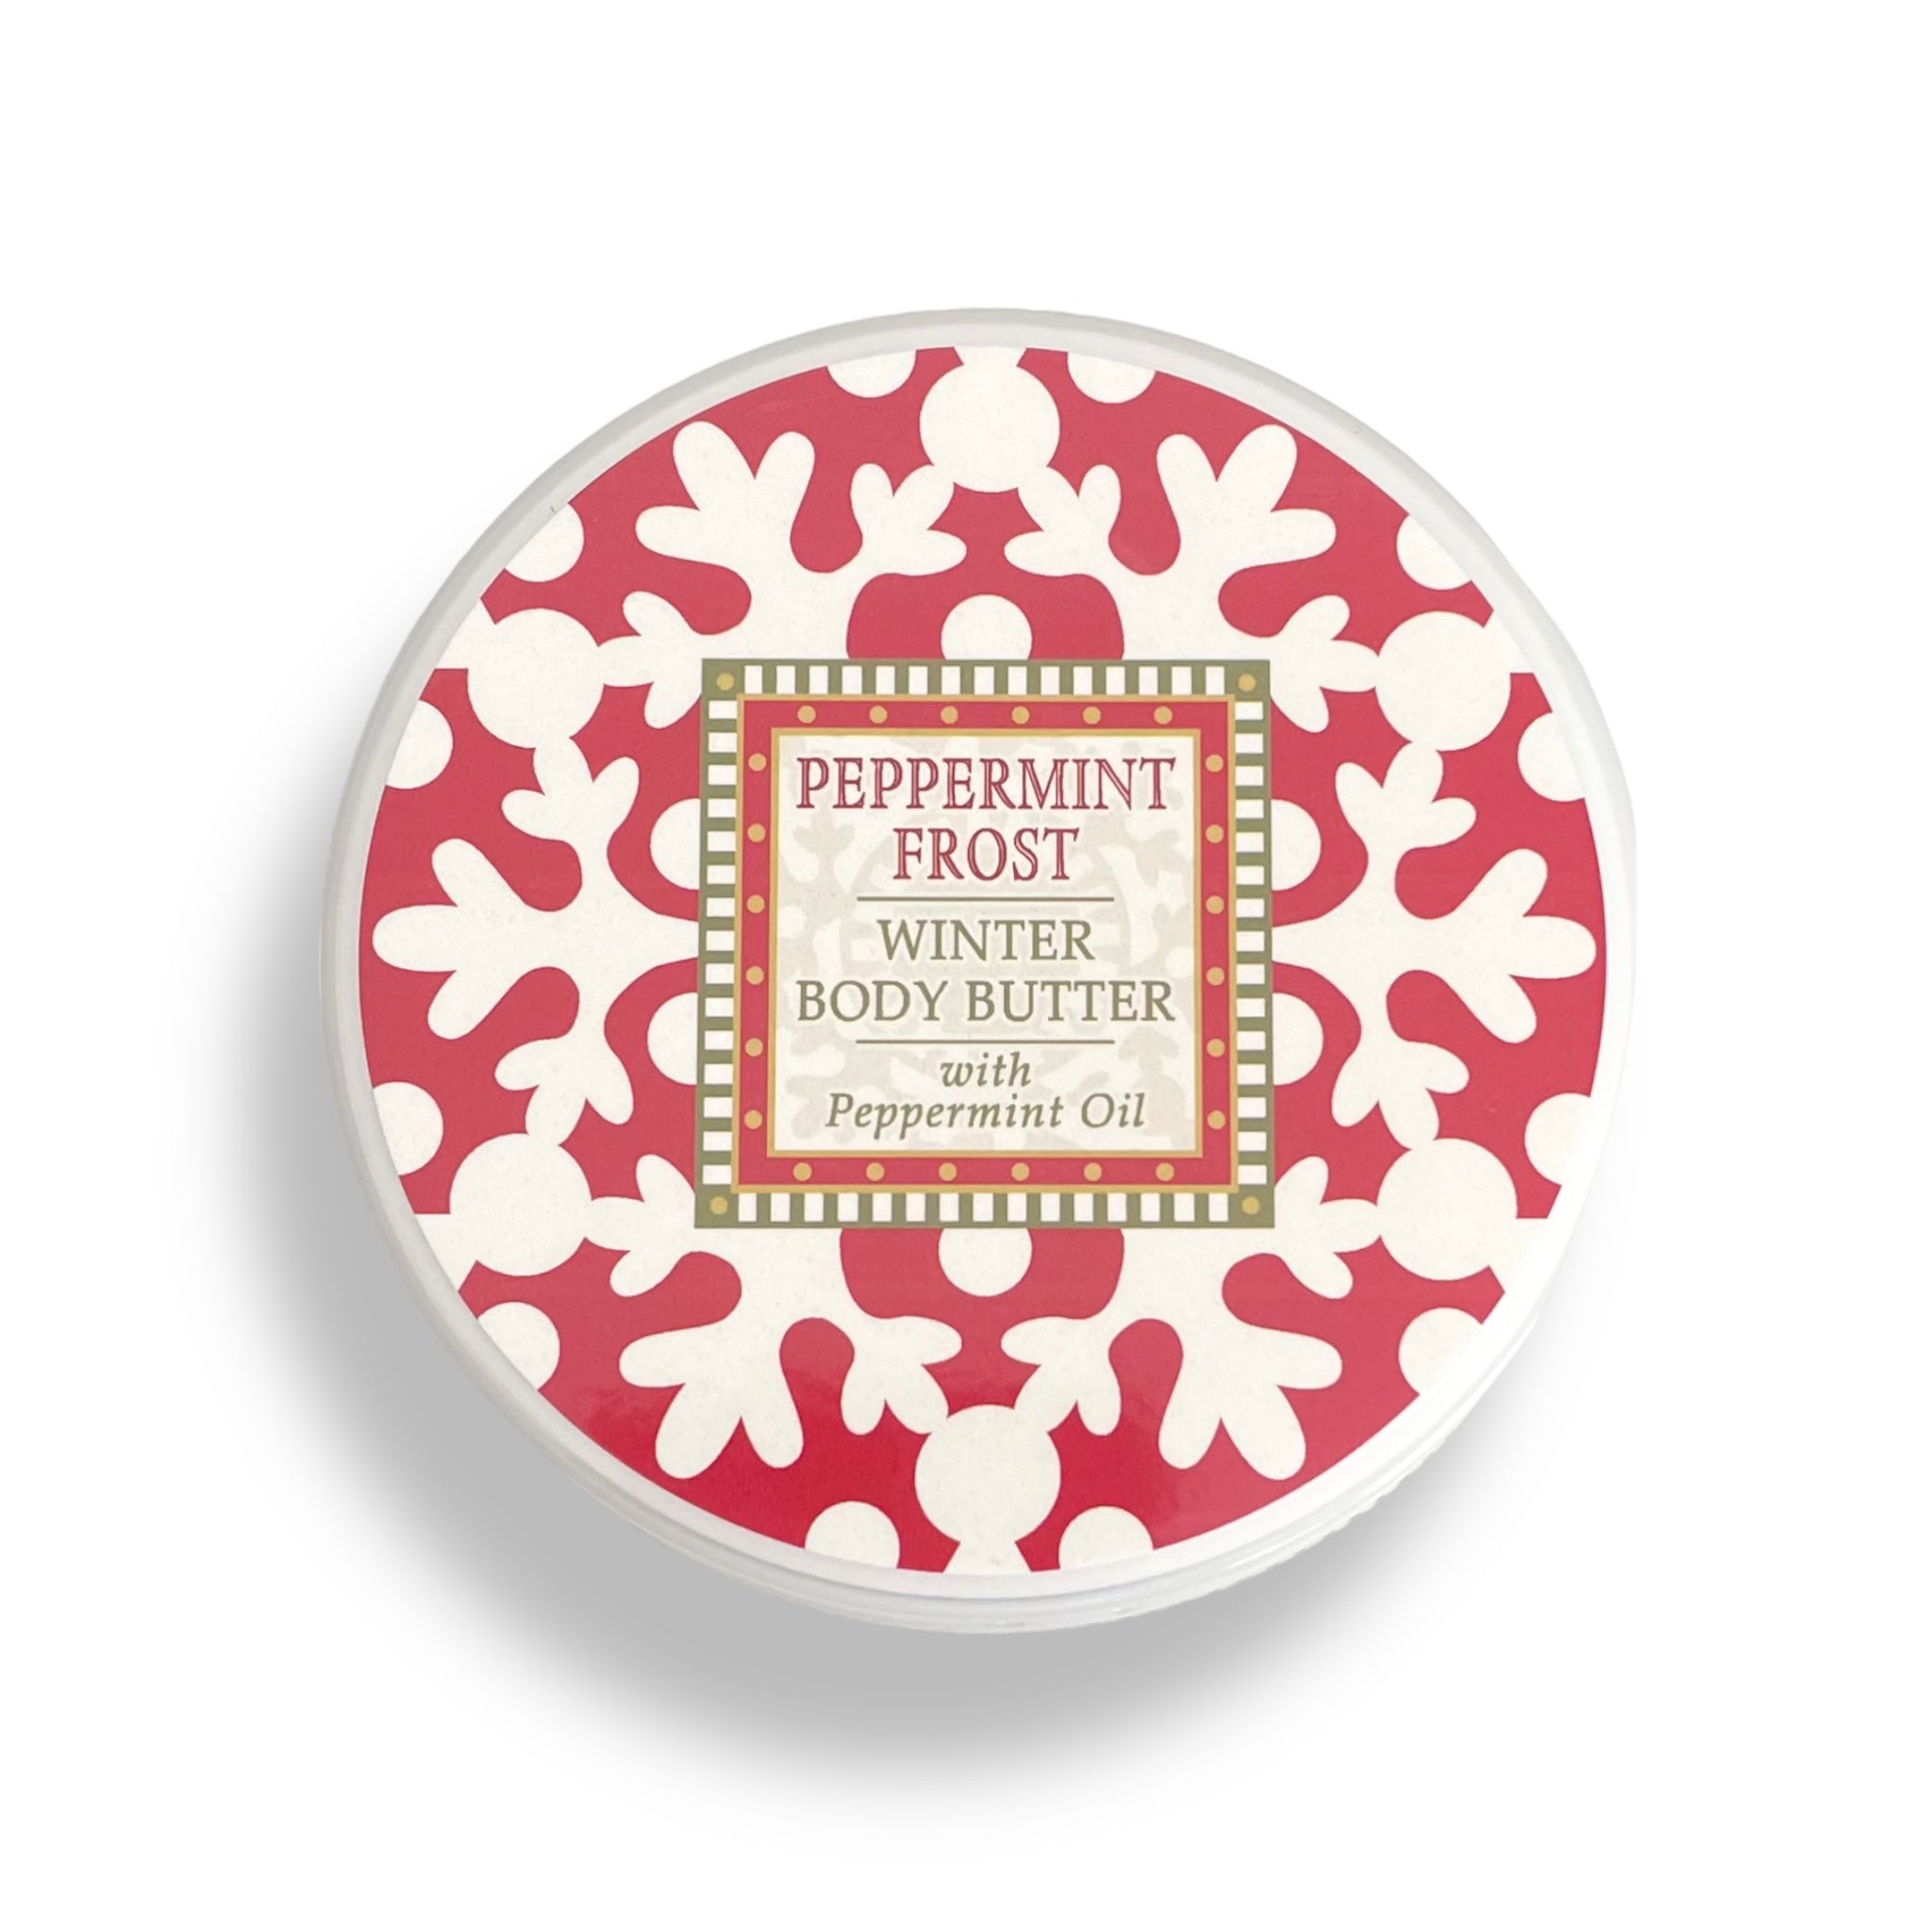 Greenwich Bay Trading Company PEPPERMINT FROST Body Butter